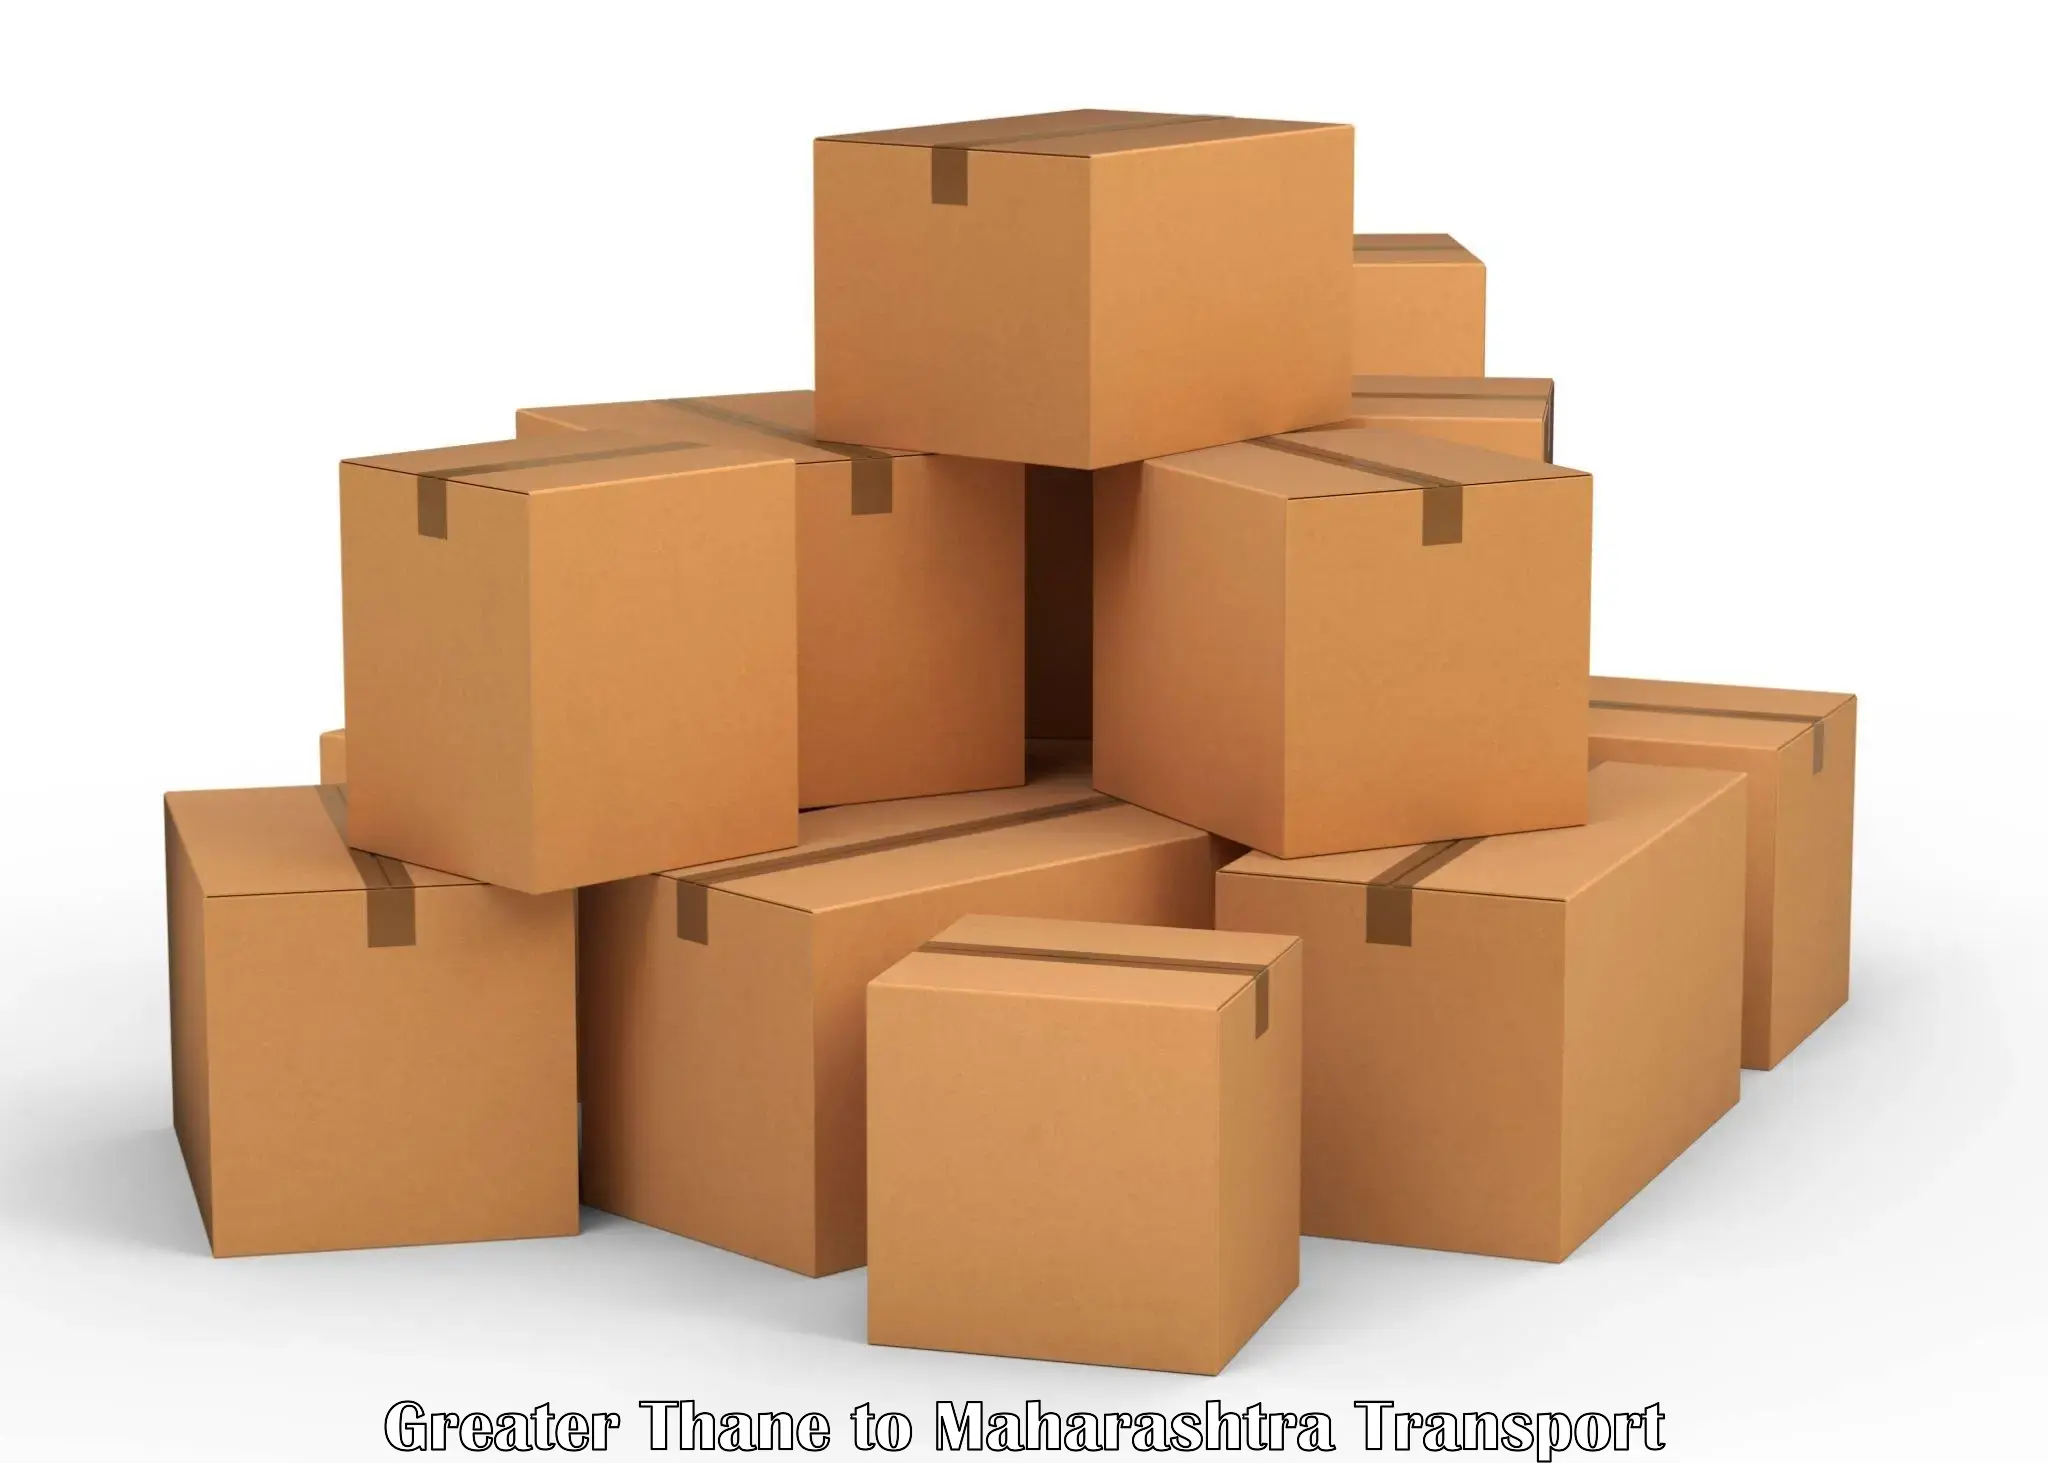 Daily parcel service transport in Greater Thane to Pune